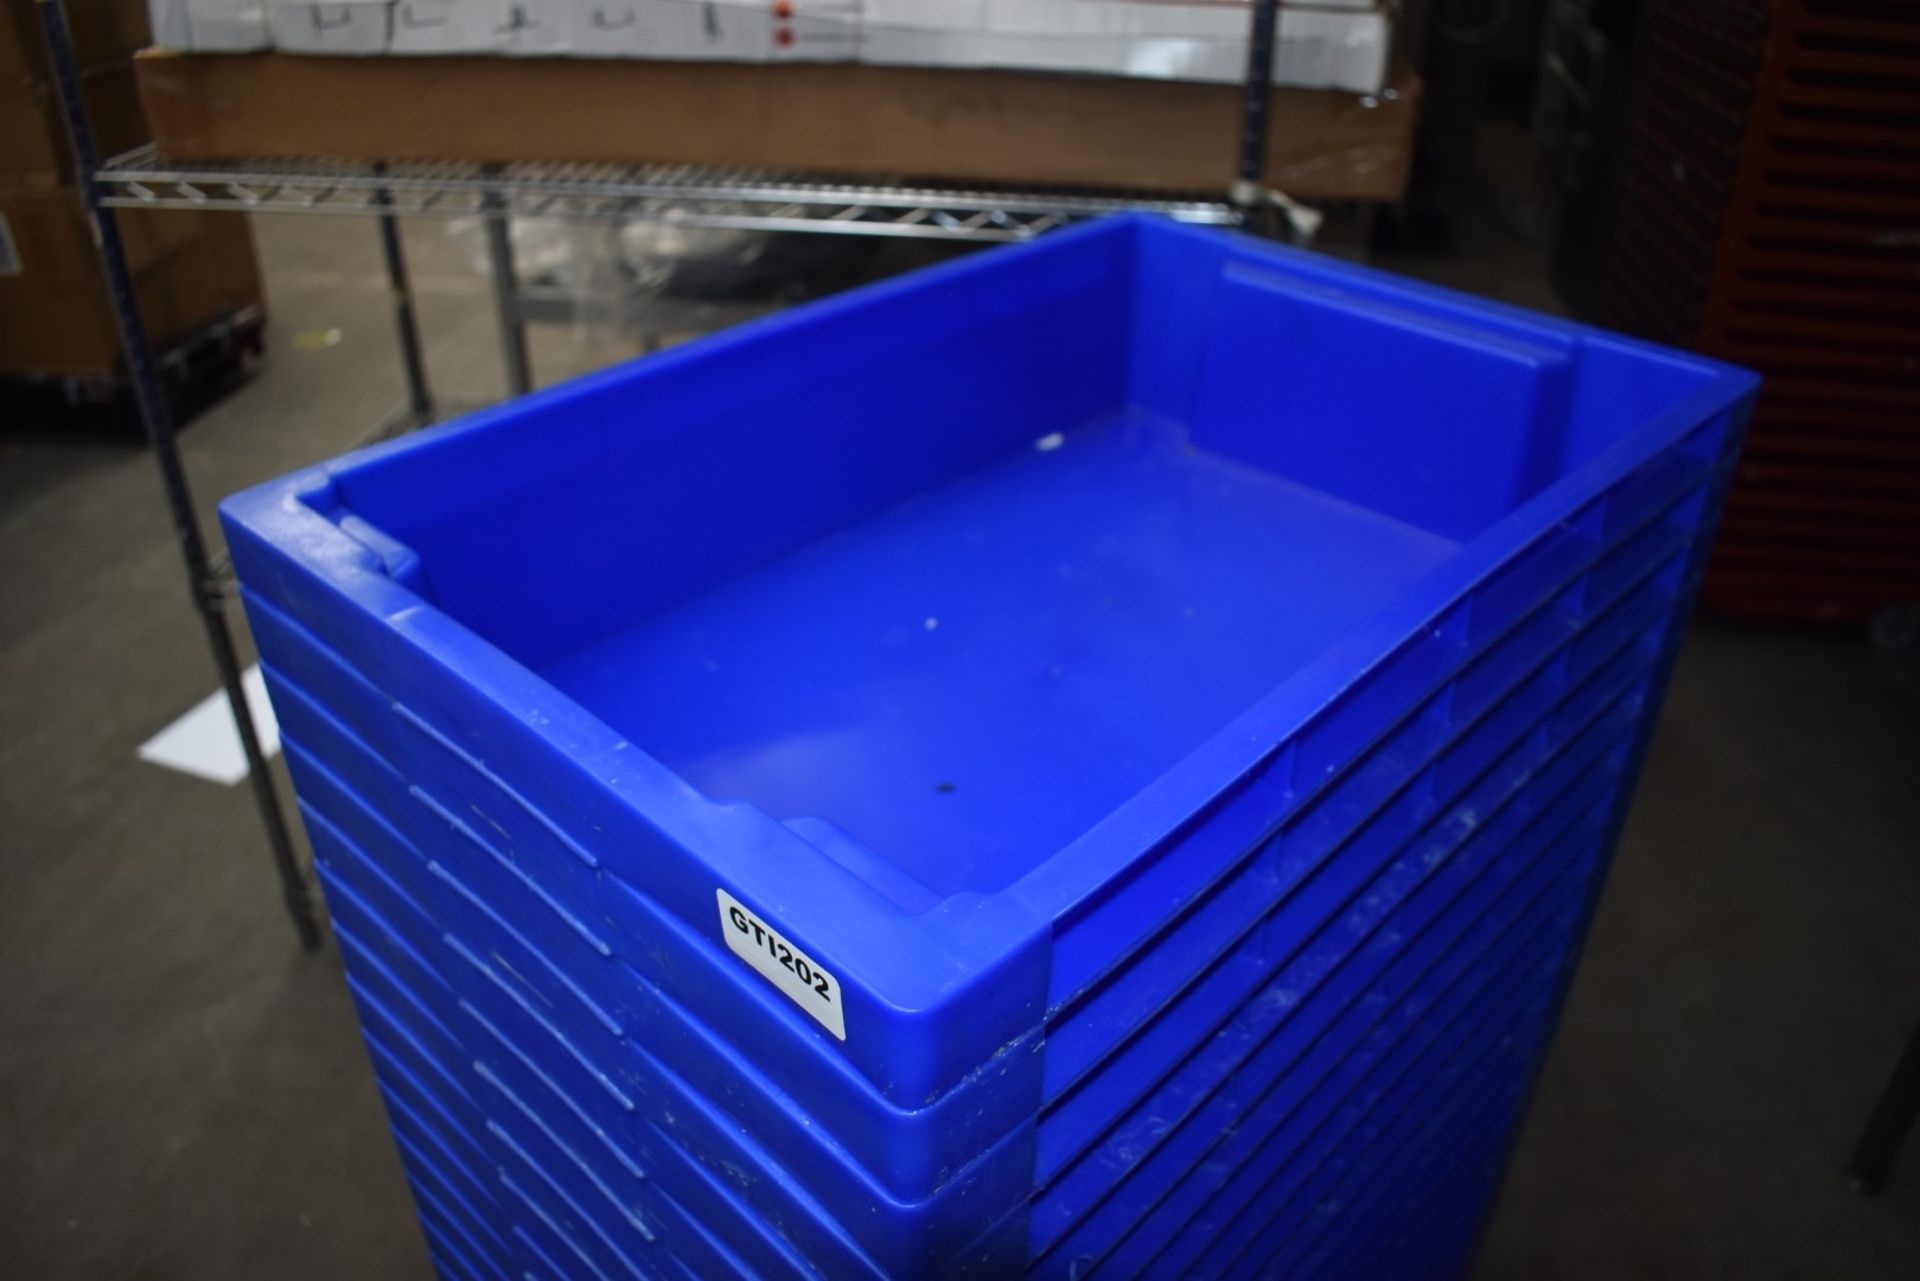 27 x Plastic Stackable Storage Trays in Blue - Includes Mobile Platform Dolly on Castors - Tray - Image 3 of 7